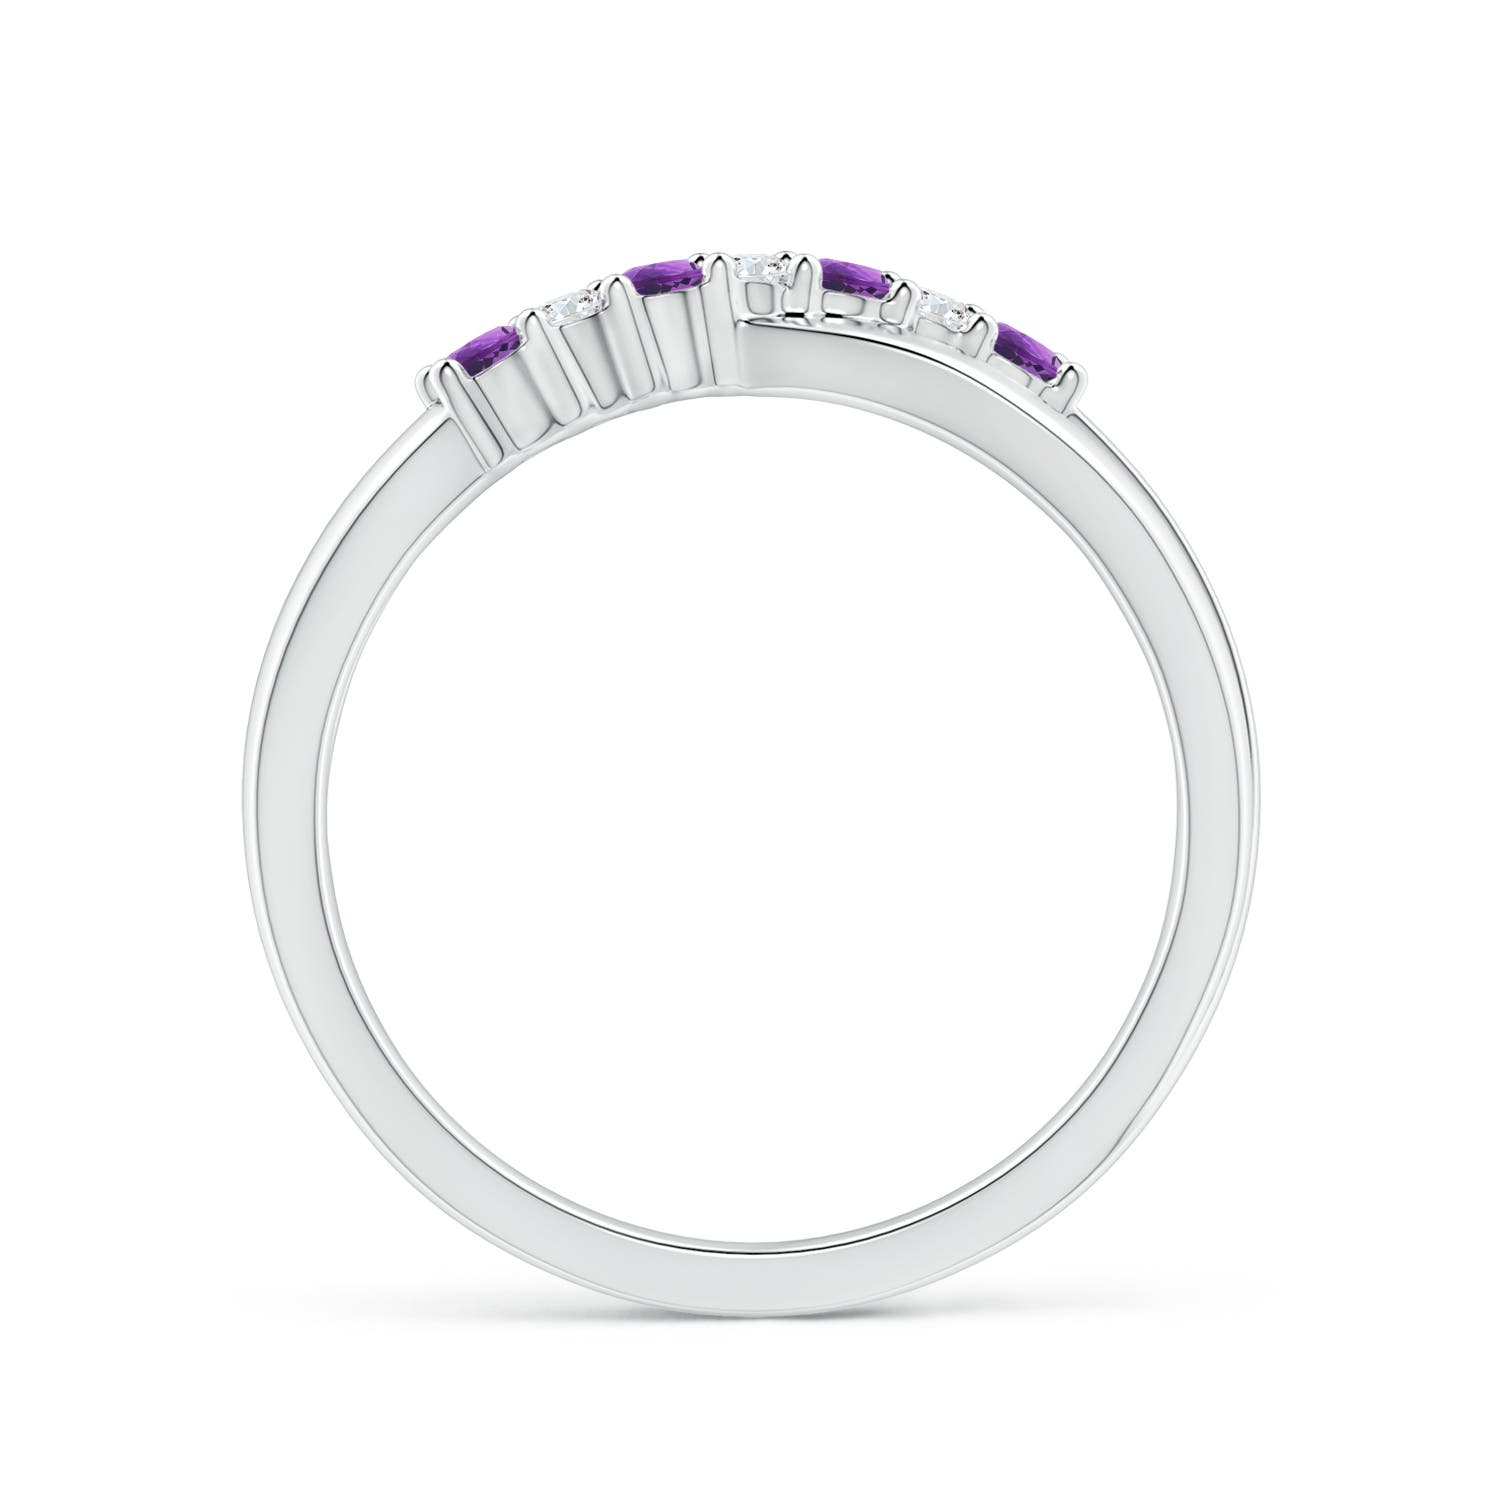 AAA - Amethyst / 0.18 CT / 14 KT White Gold